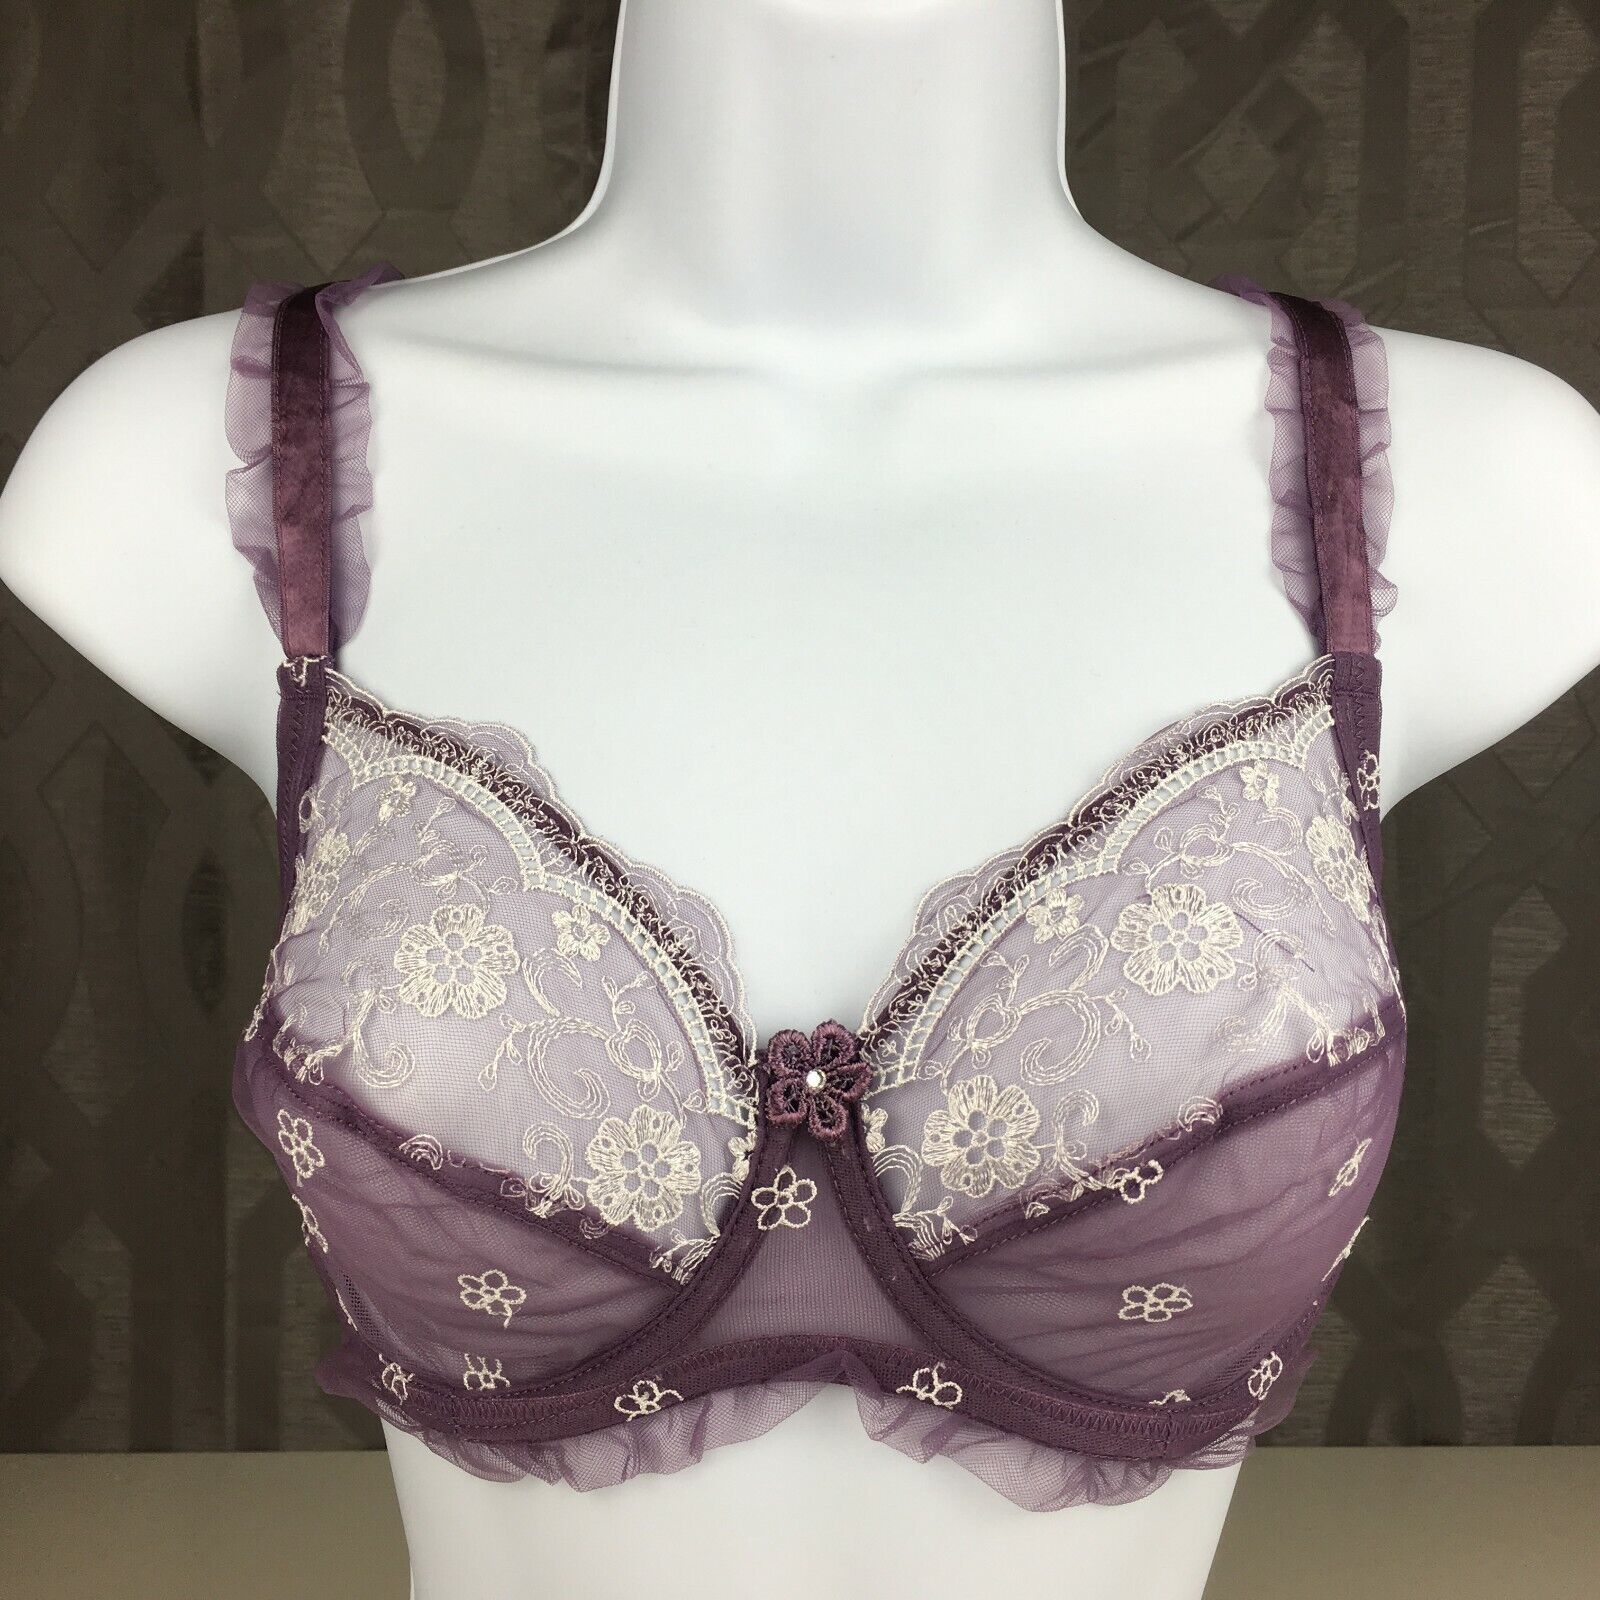 ALEGRO Sheer with Lace Underwire Sexy Lingerie Bra - Violet 9003 - 30-40 NWT